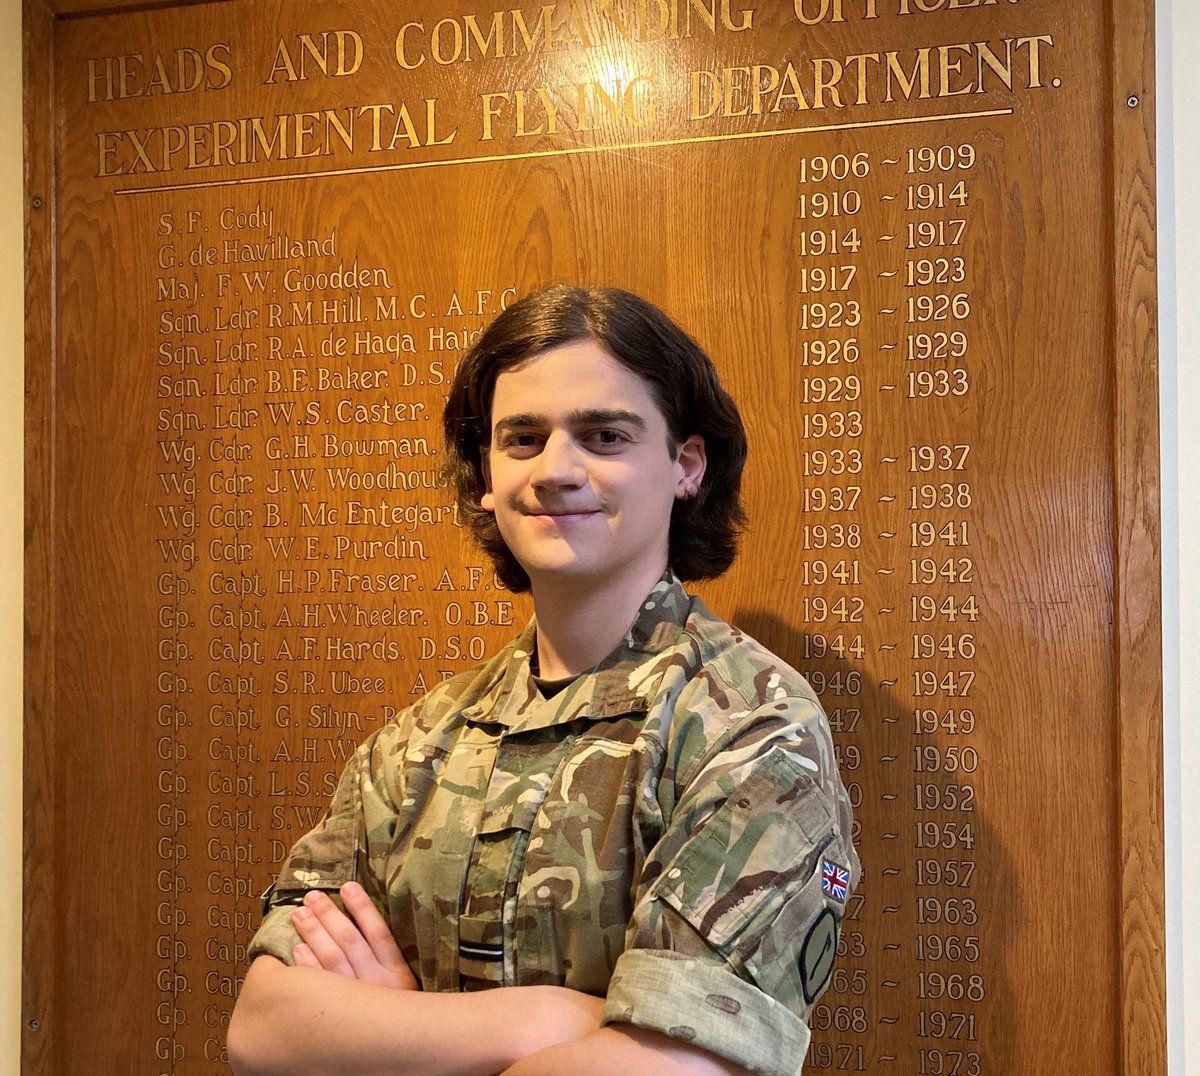 ‘I’m Emily Huskisson, and I’m an officer in the RAF. I’m also trans, so Trans Day of Visibility is very special to me. On #TDoV, we recognise all trans people and remember that, as a community, we are better when everyone can be their whole self. - Emily, FN Gender Identity Lead